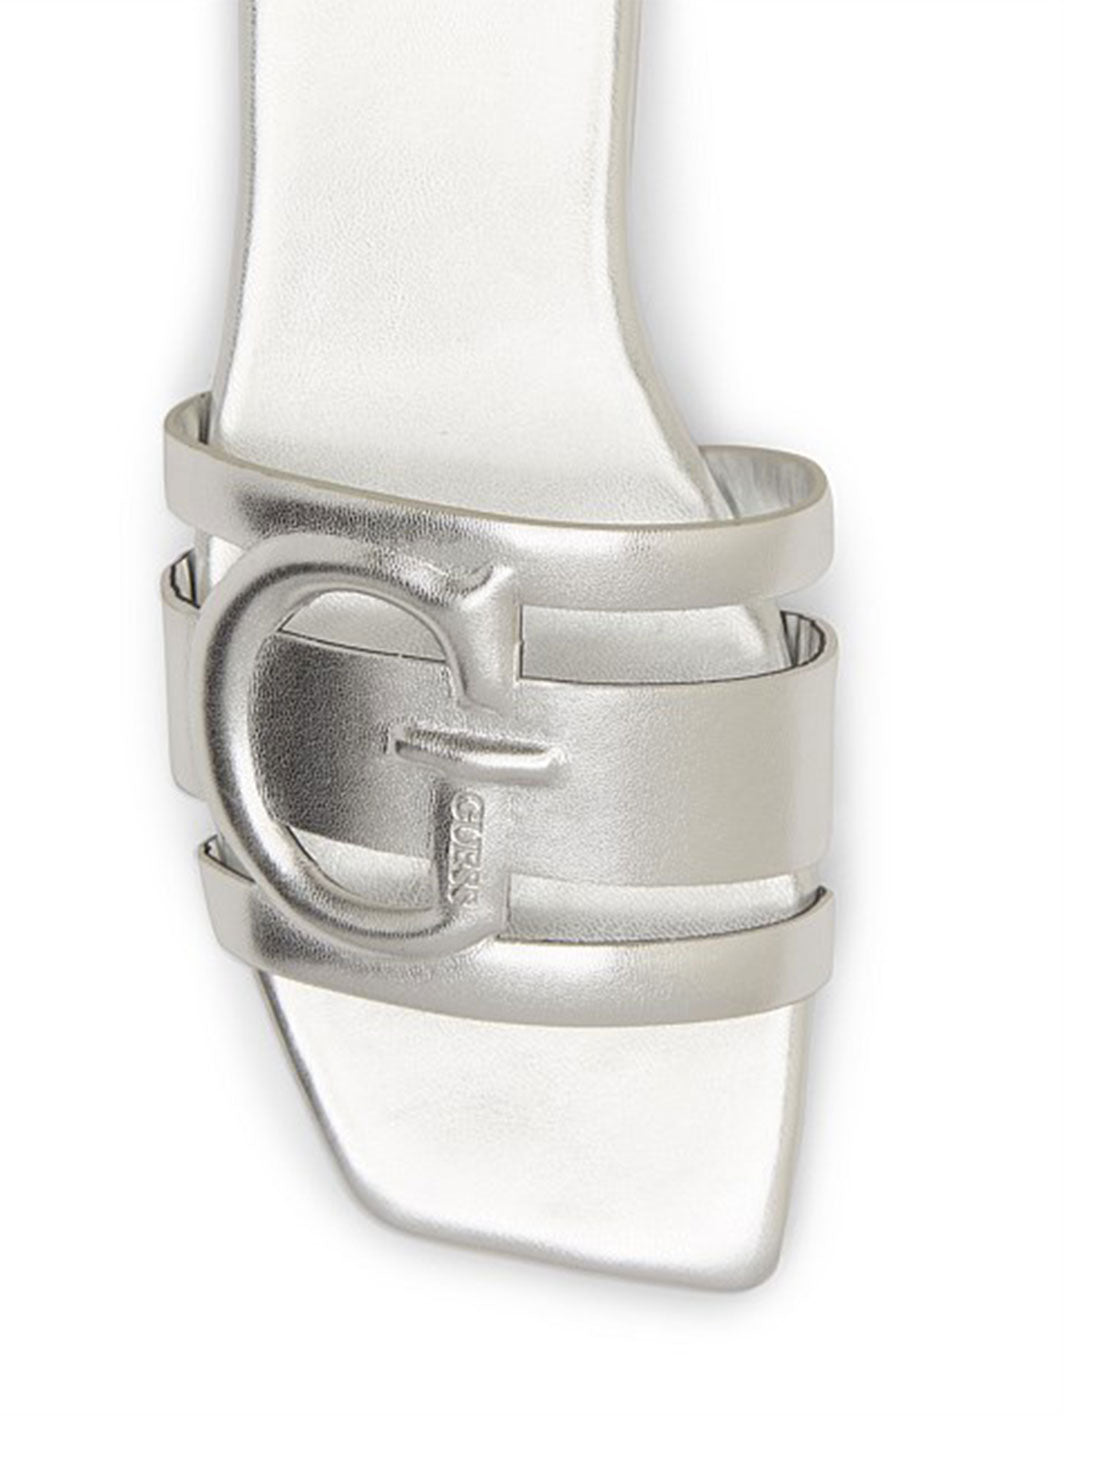 GUESS Womens Silver Caffy Sandals detail view